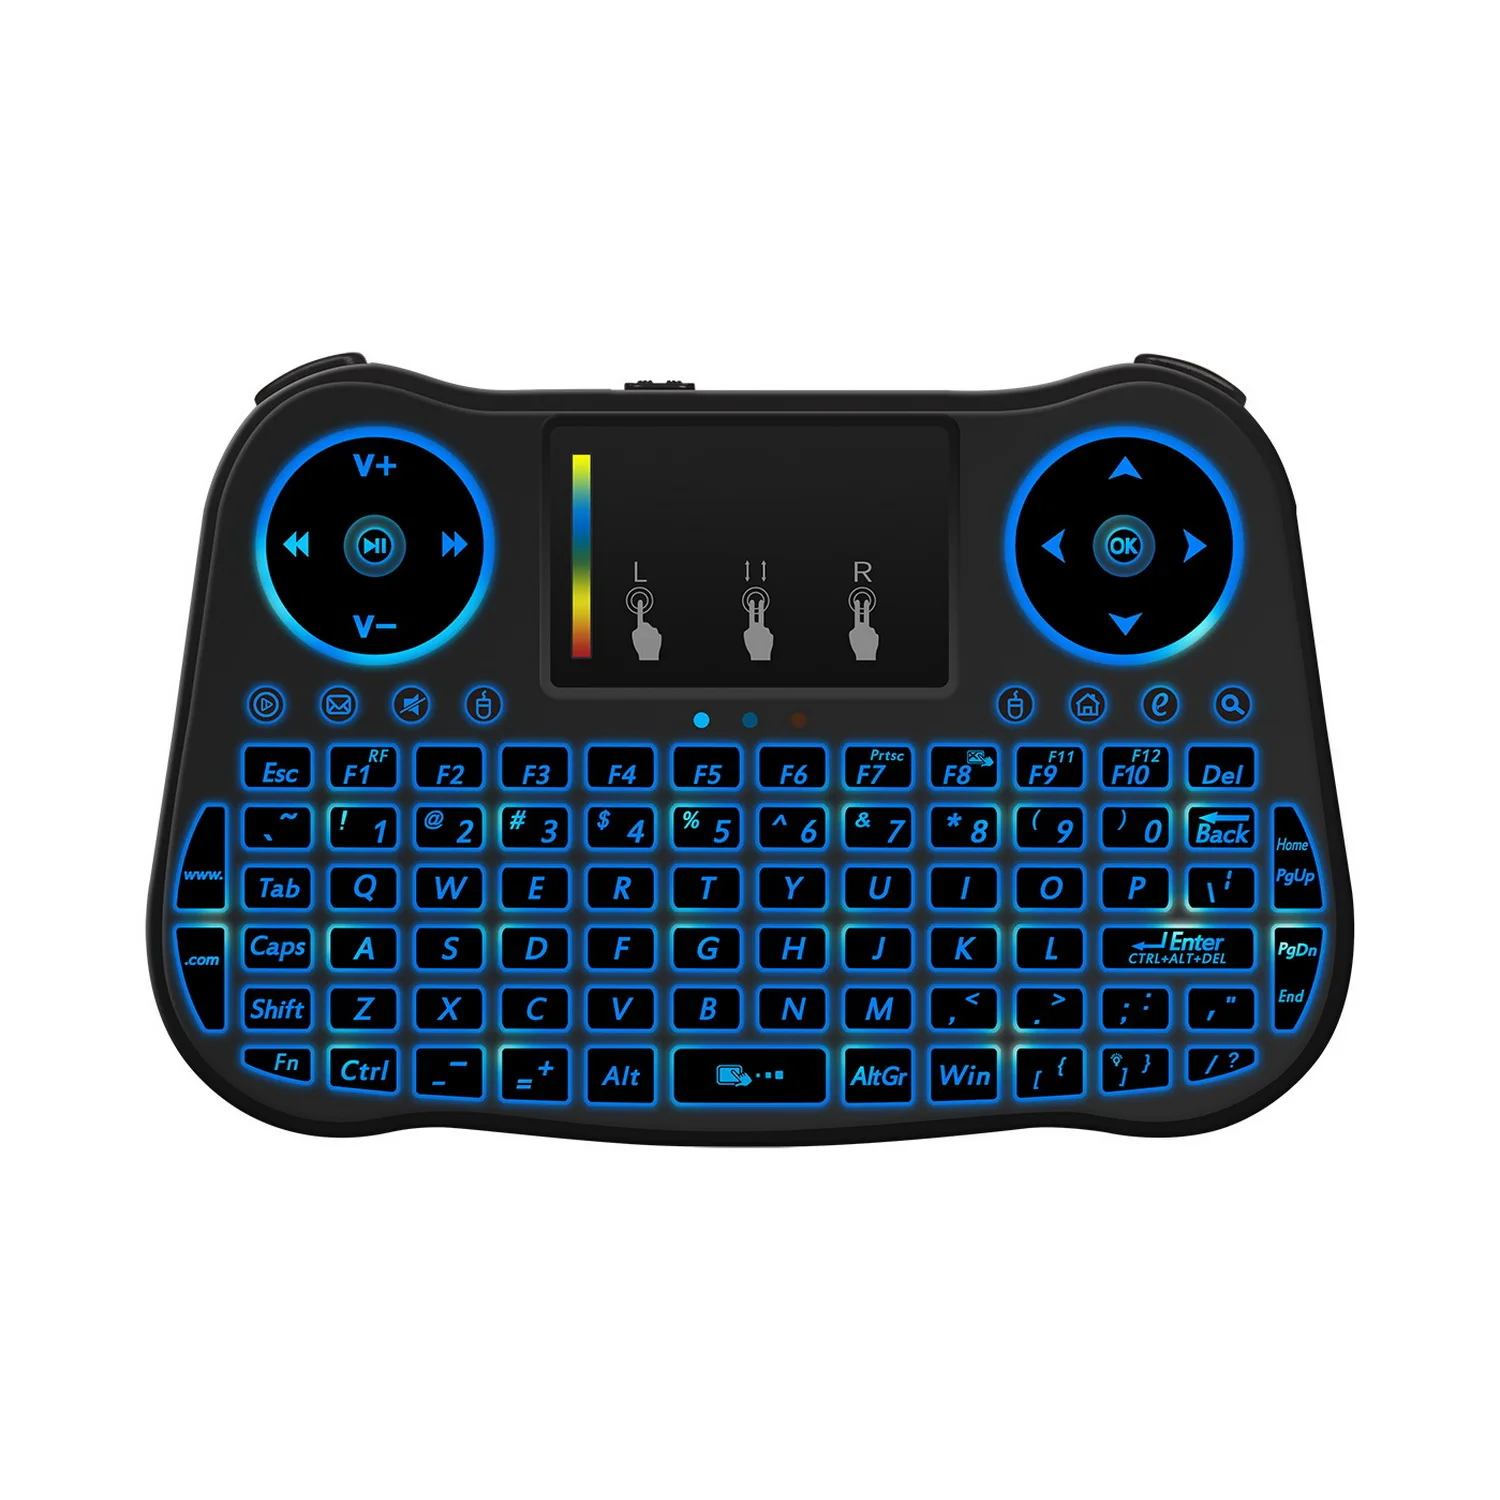 

Shenzhen Factory 2.4G Wireless Multi Language Layout Backlit Air Mouse Keyboard MT08 with Battery